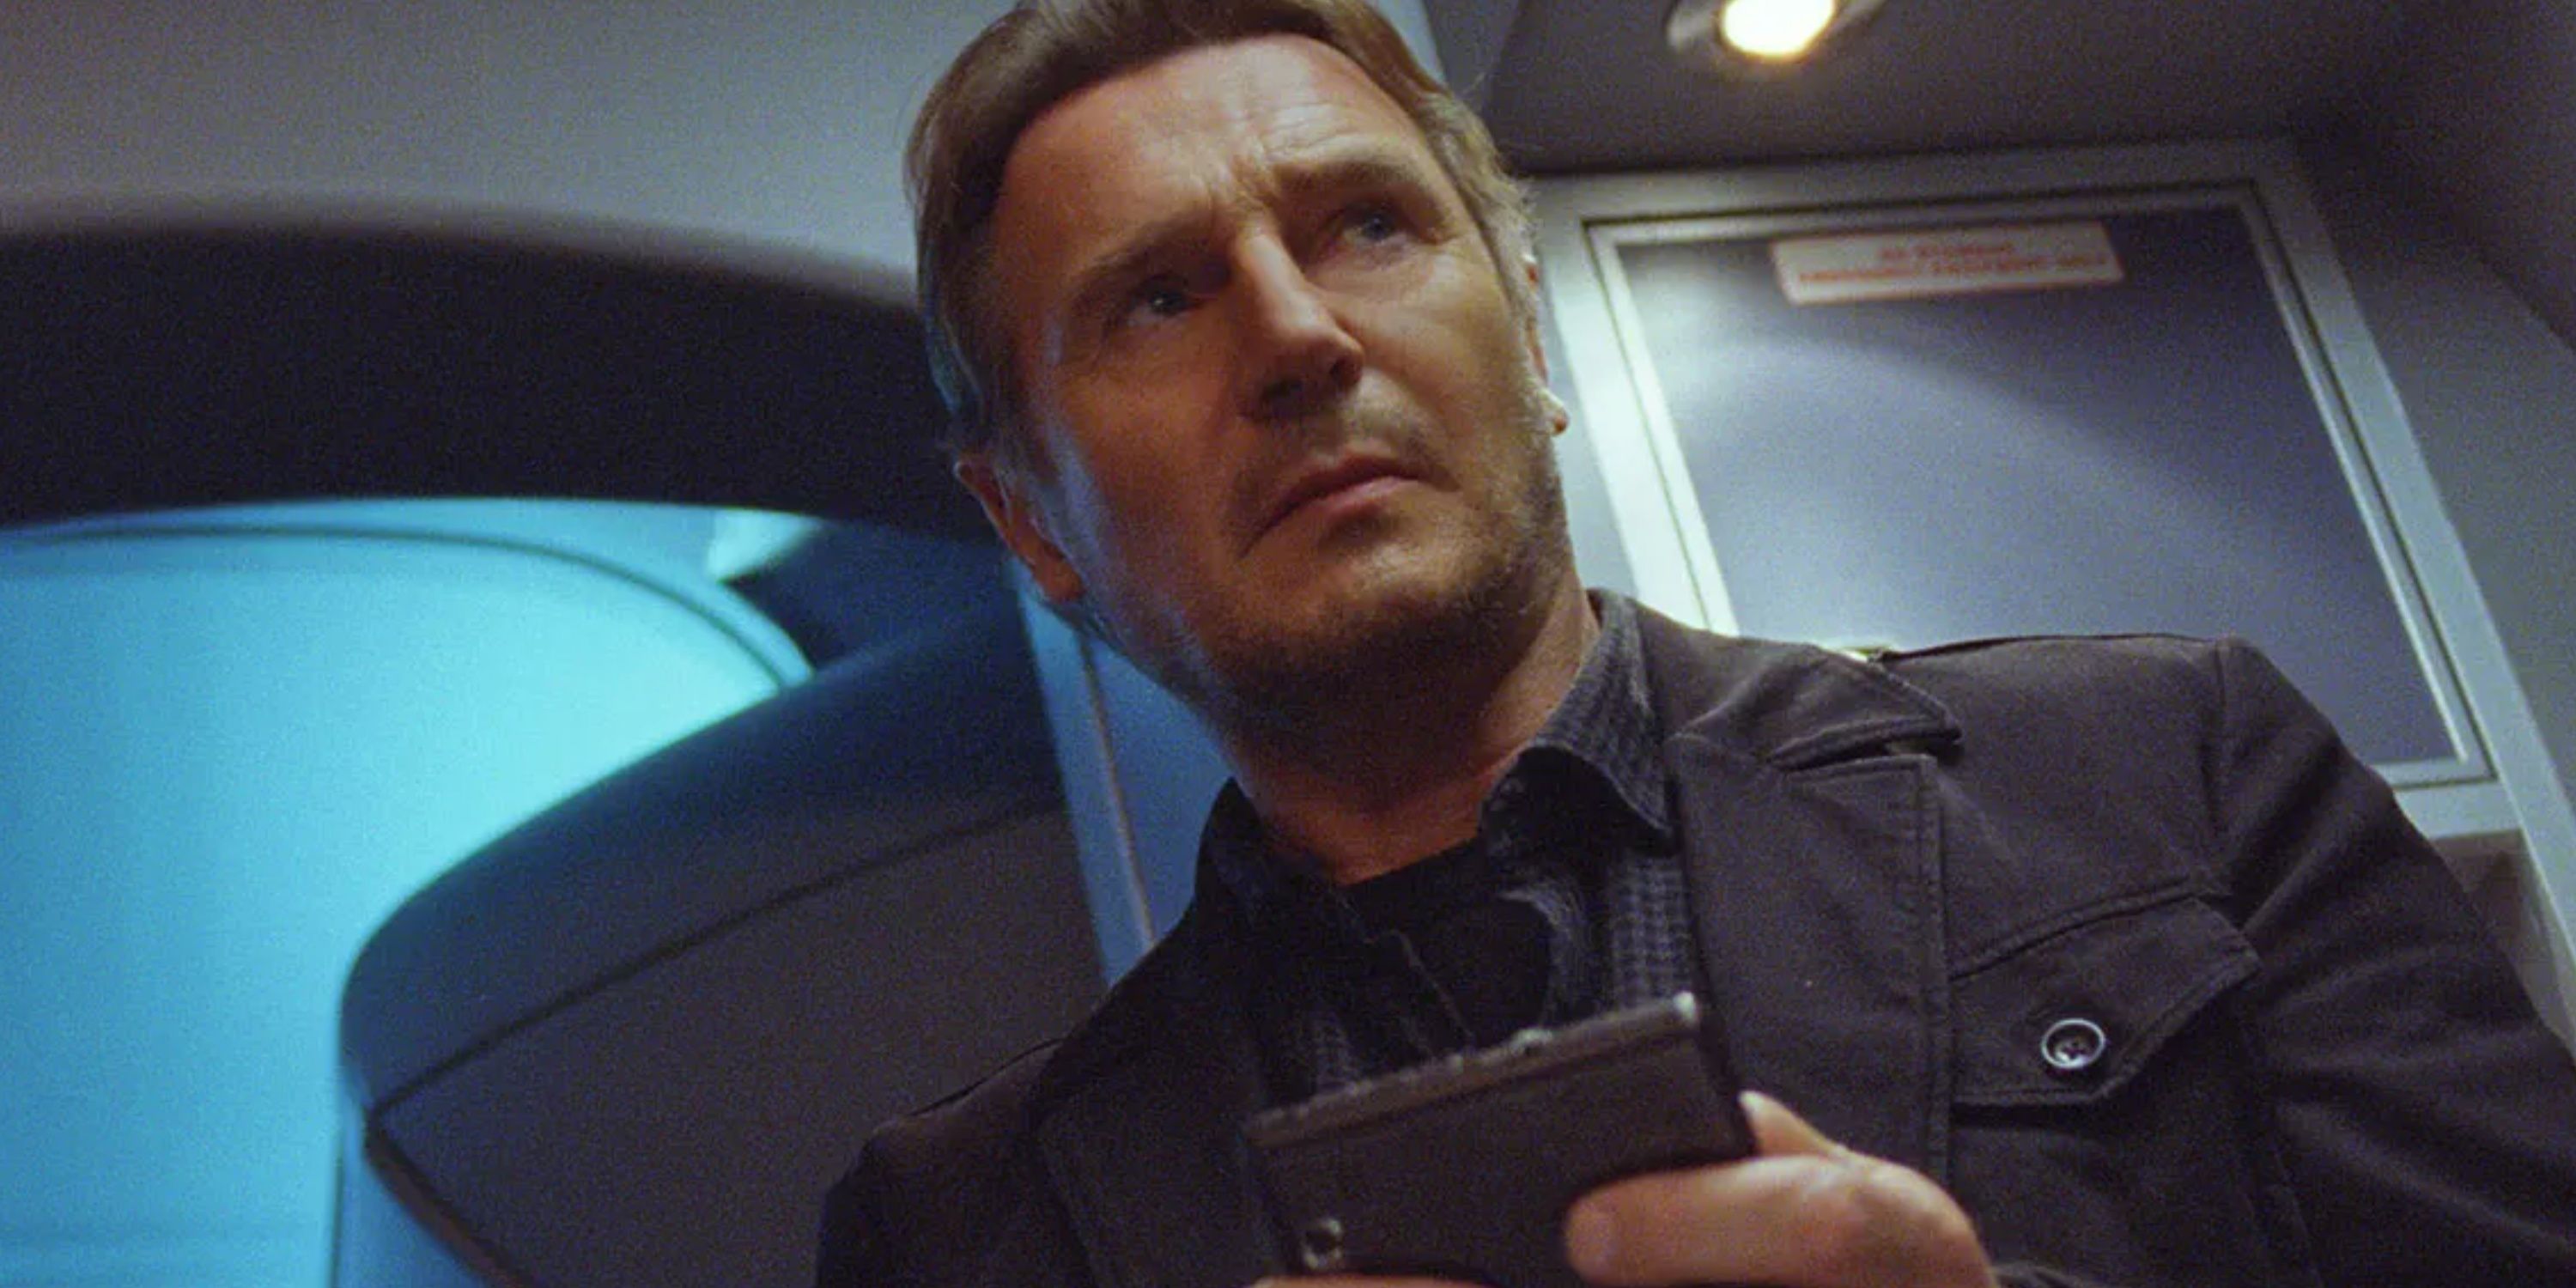 Non-Stop Ending Explained – The Killer's Identity & Their Plan For Liam  Neeson In The Plane Thriller